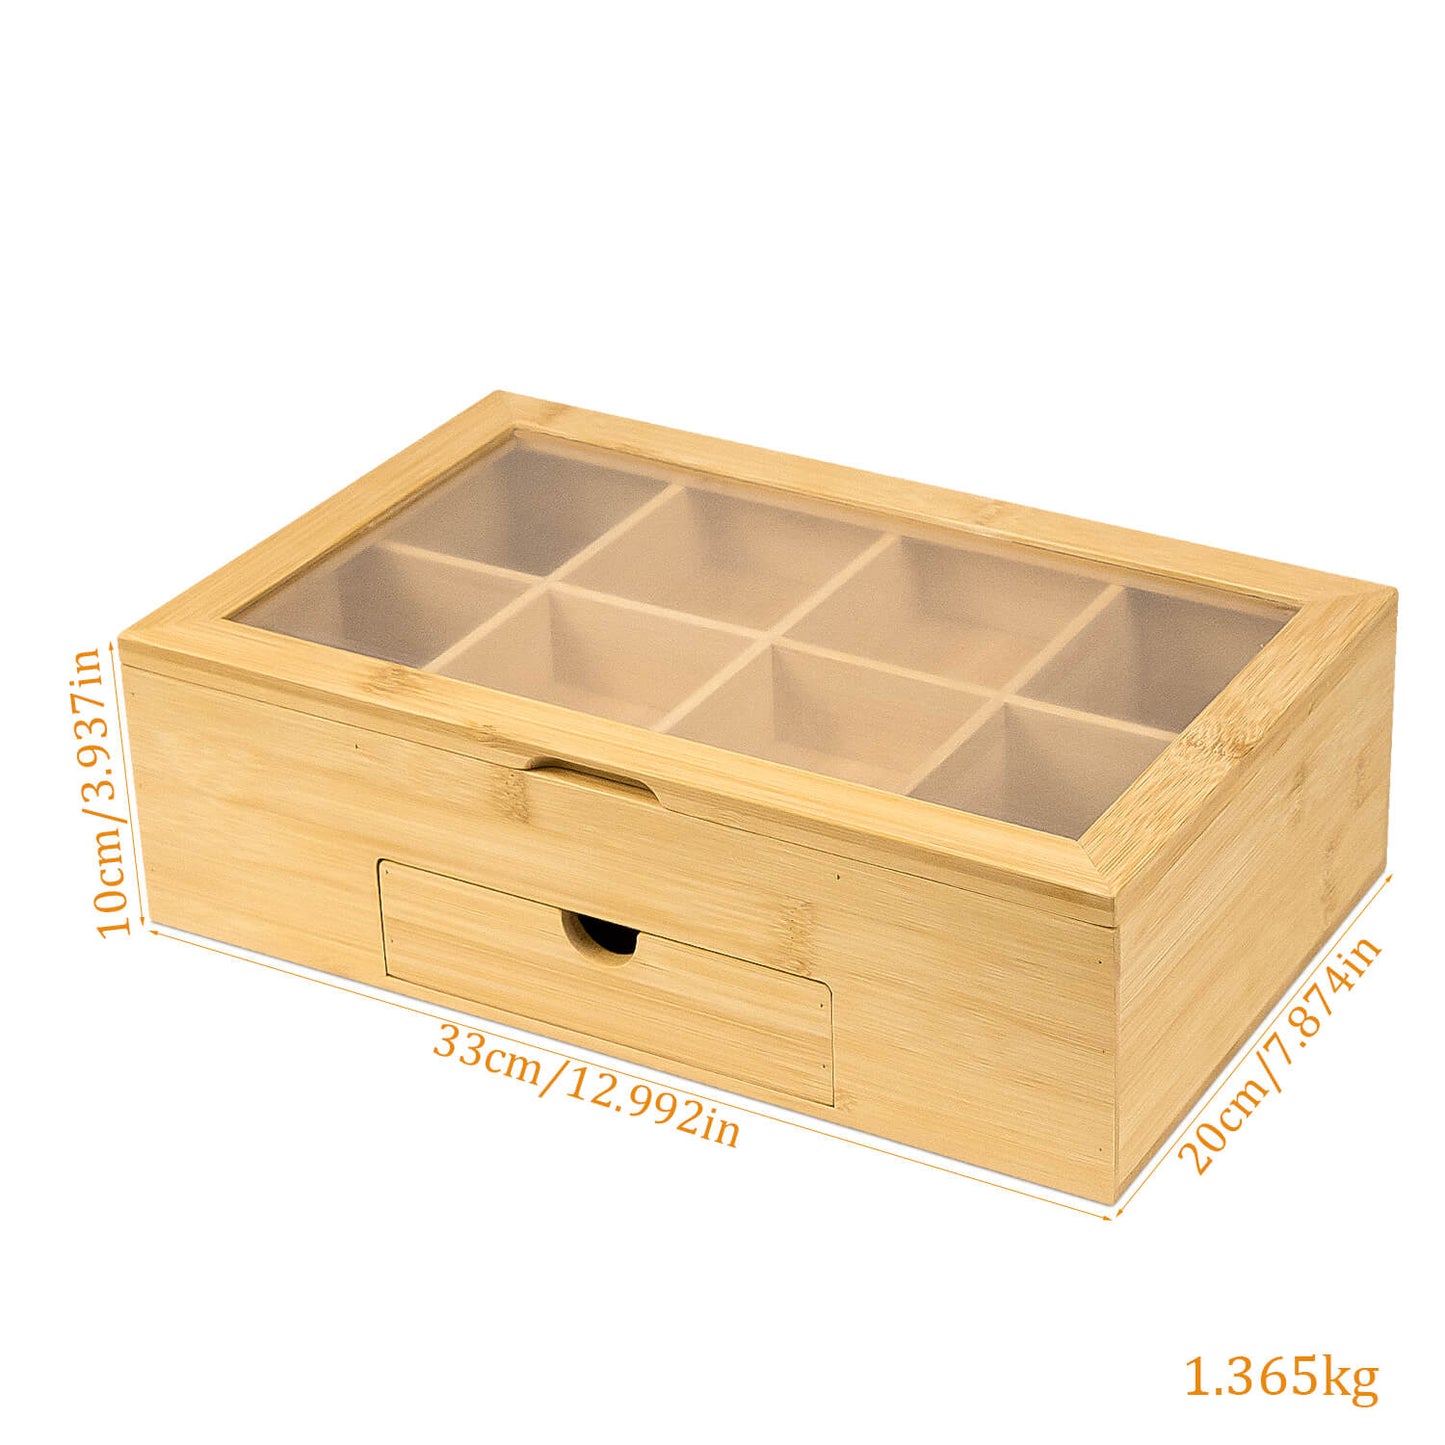 GL-Bamboo Tea Bag Organizer with Drawer and Magnetic Clear Lid